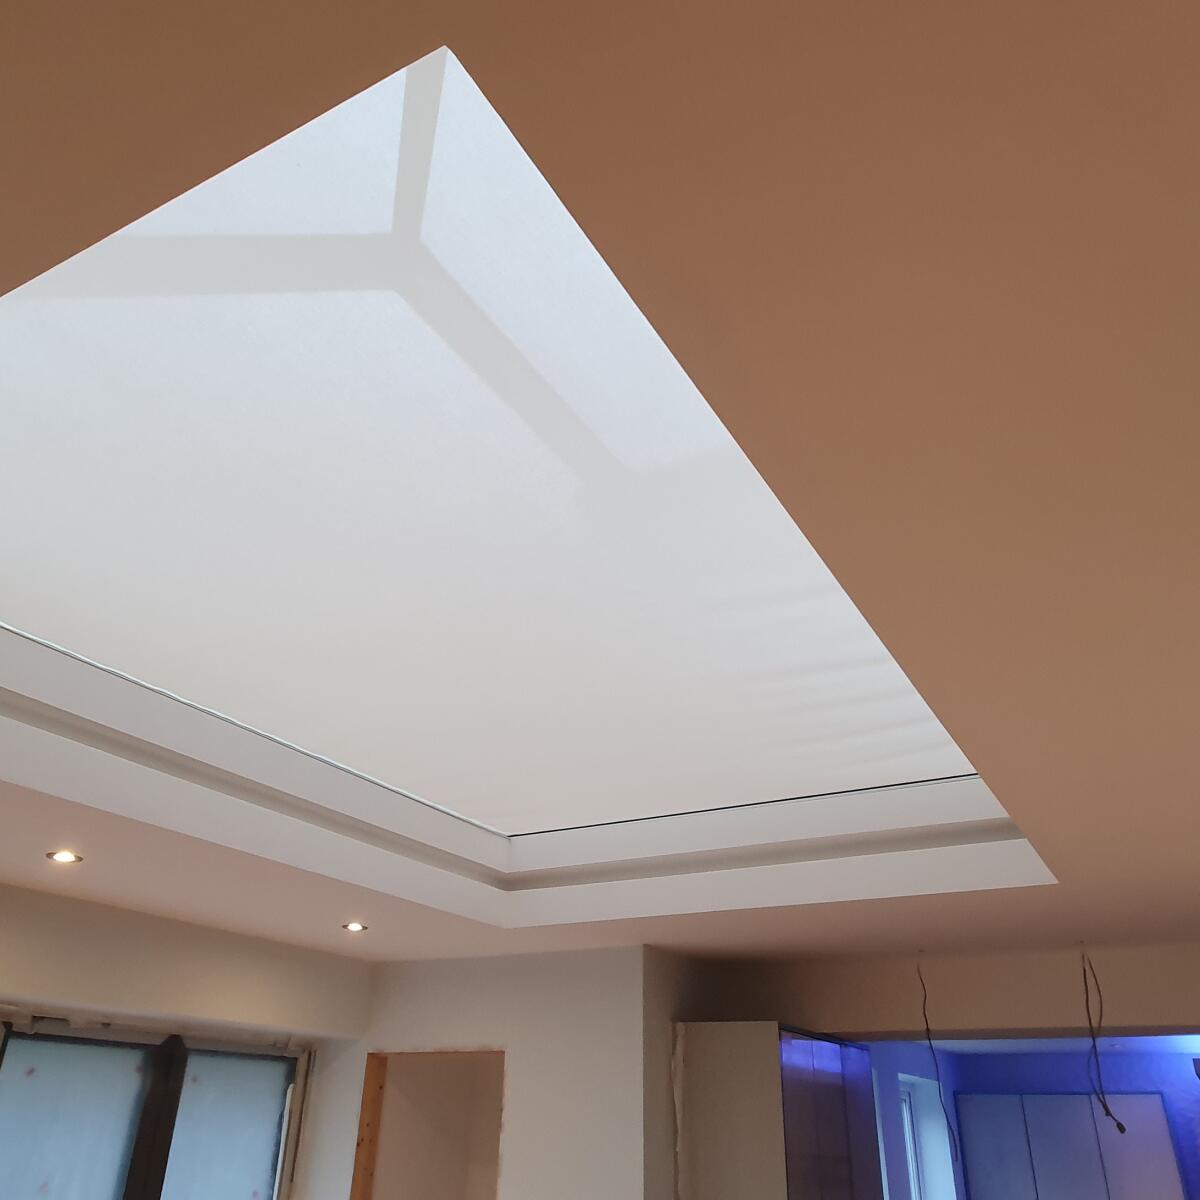 Skylightblinds Direct 5 star review on 9th March 2022